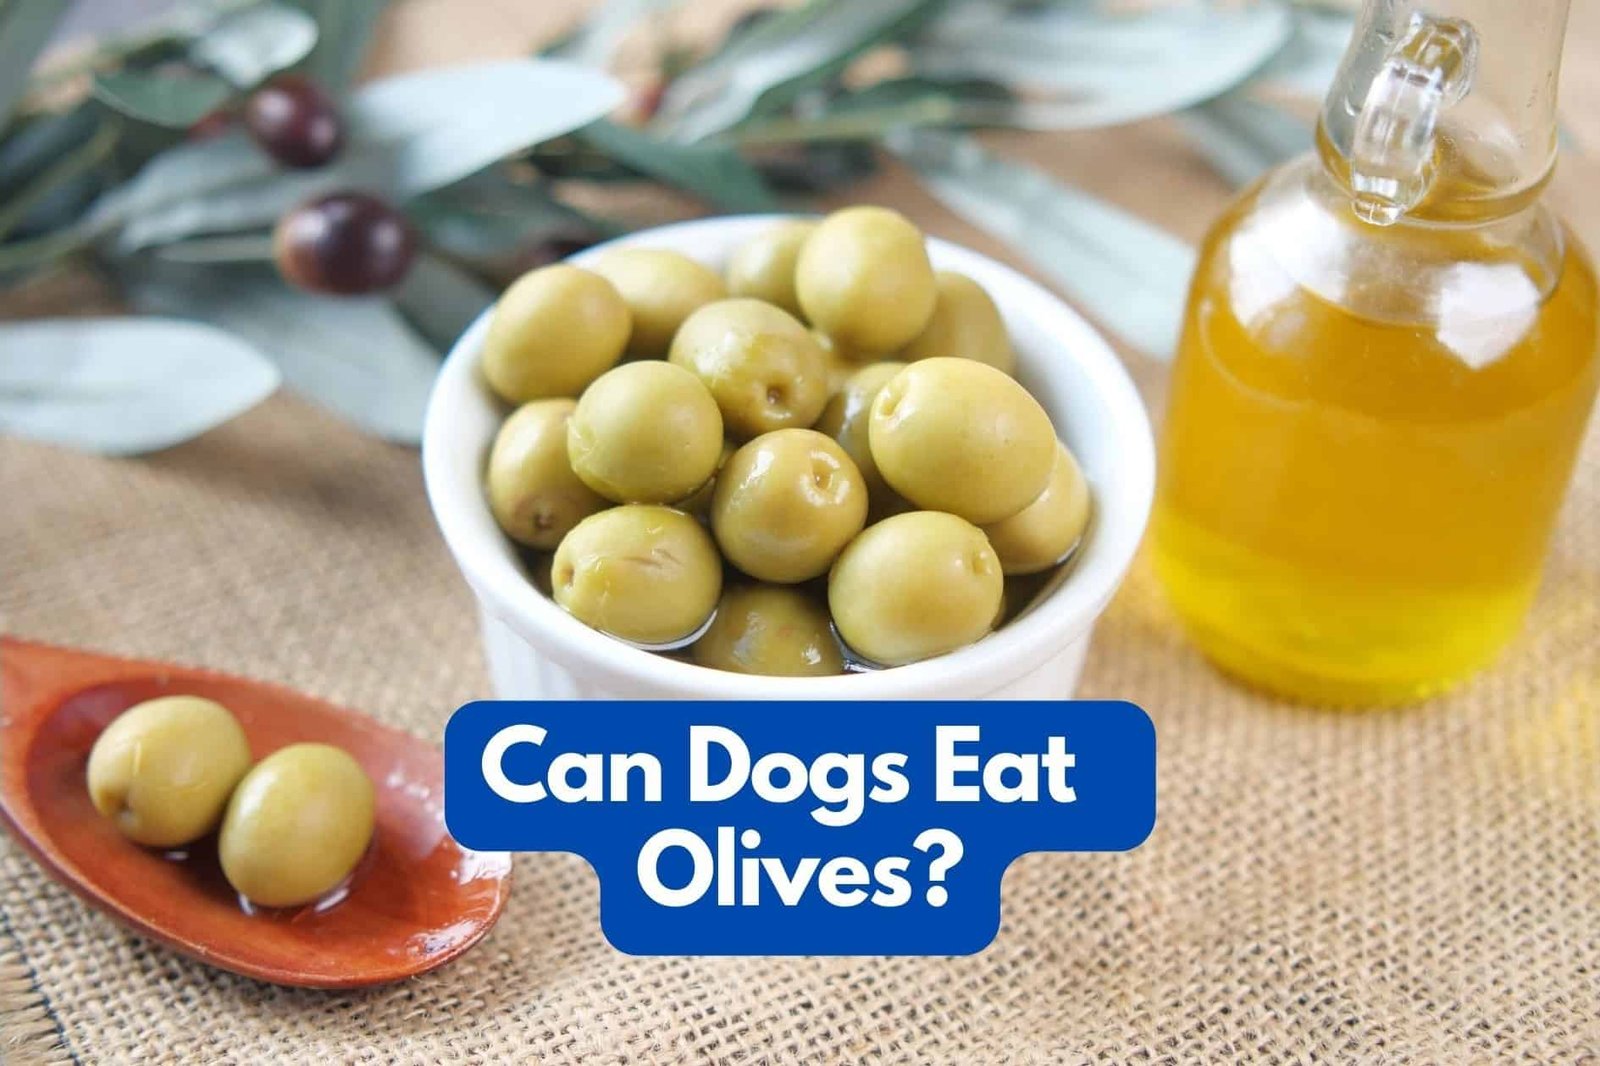 Can my dogs eat olives